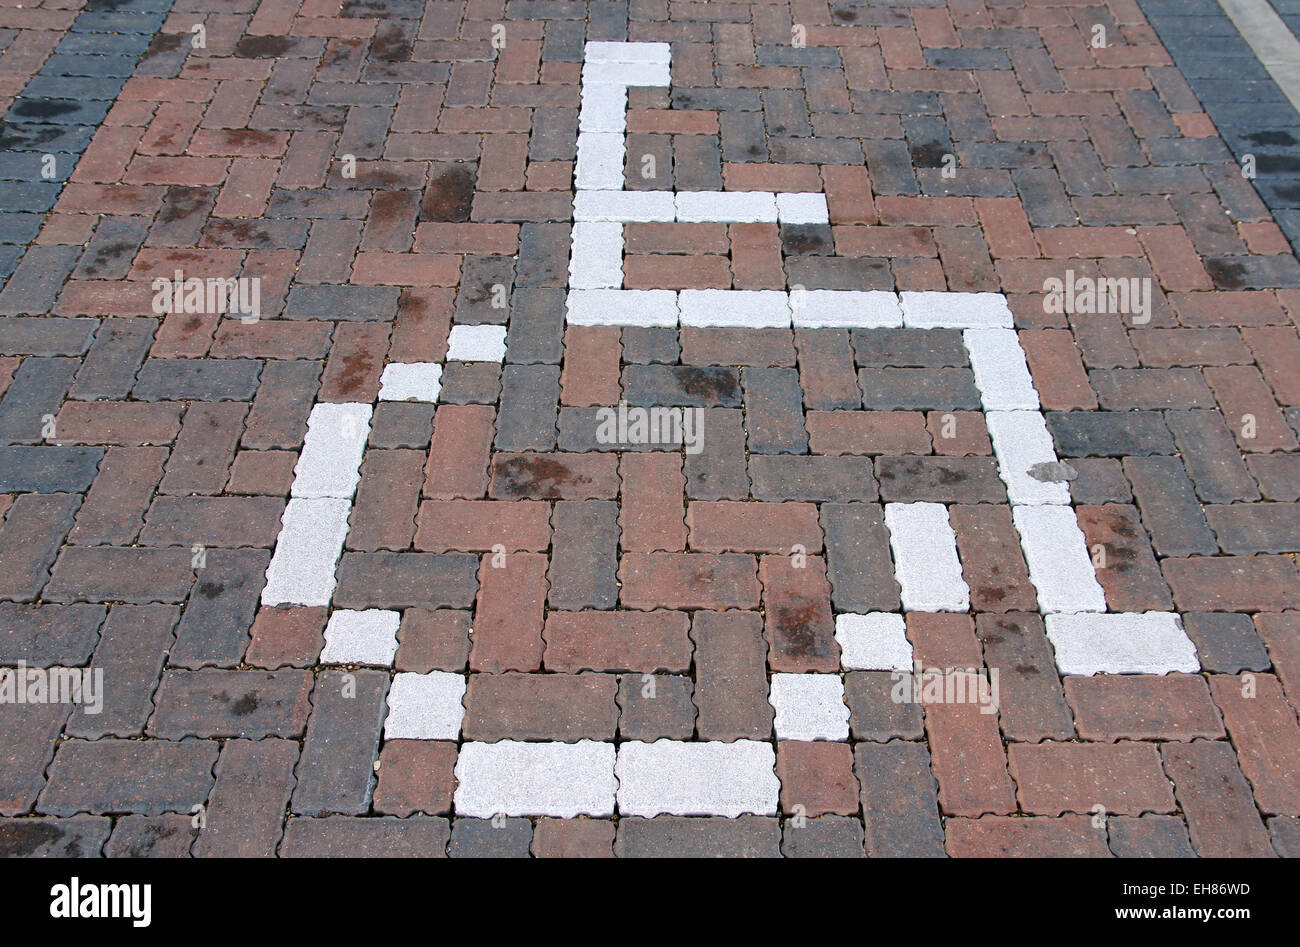 disabled parking bay Stock Photo